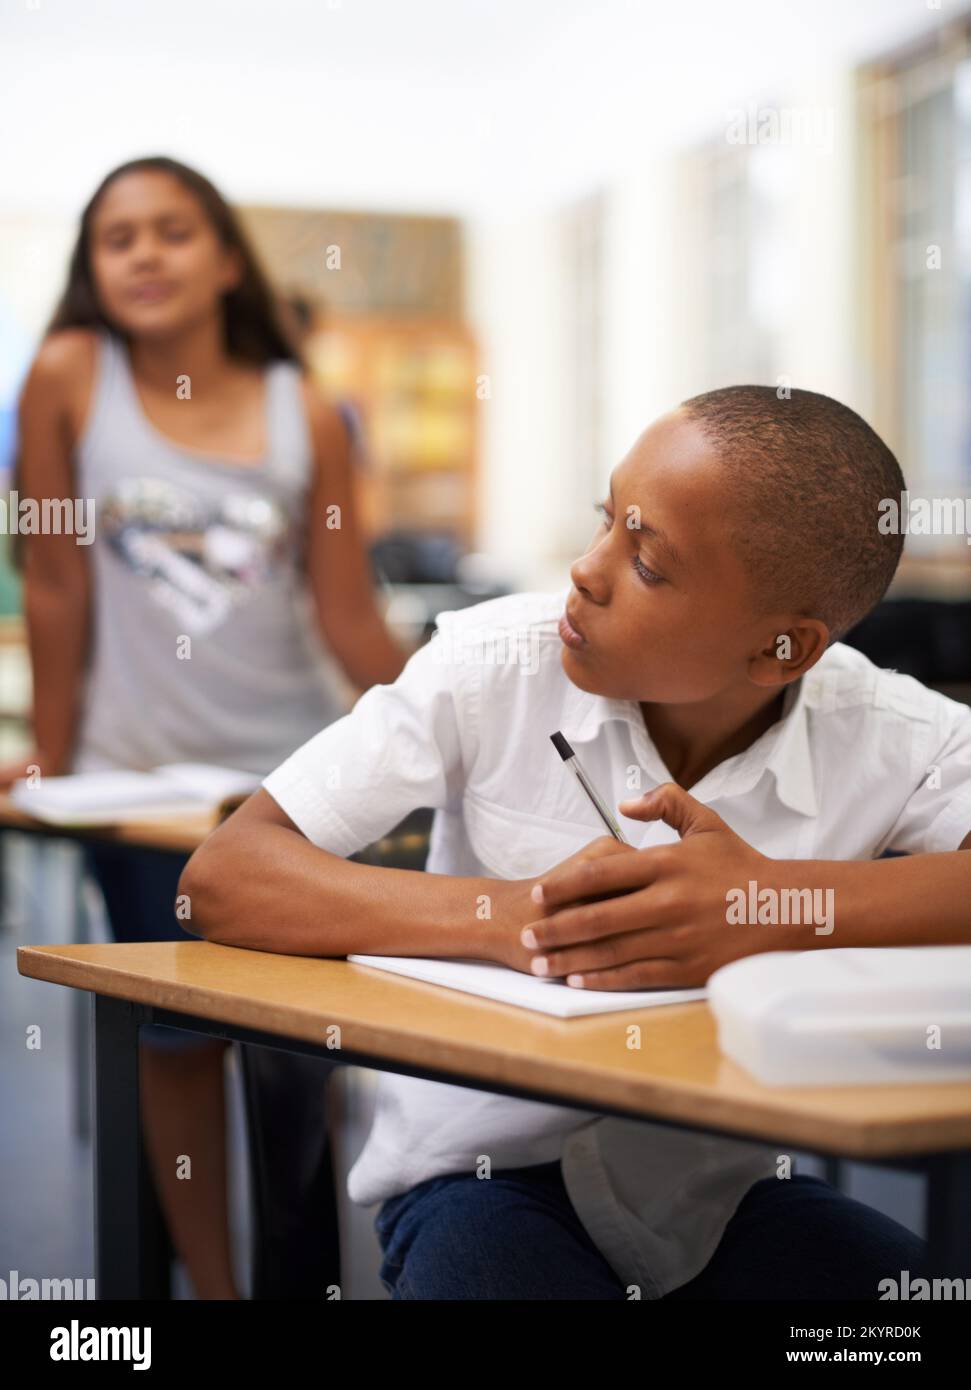 Stop copying me. A young boy writing a test while a classmate tries to copy. Stock Photo